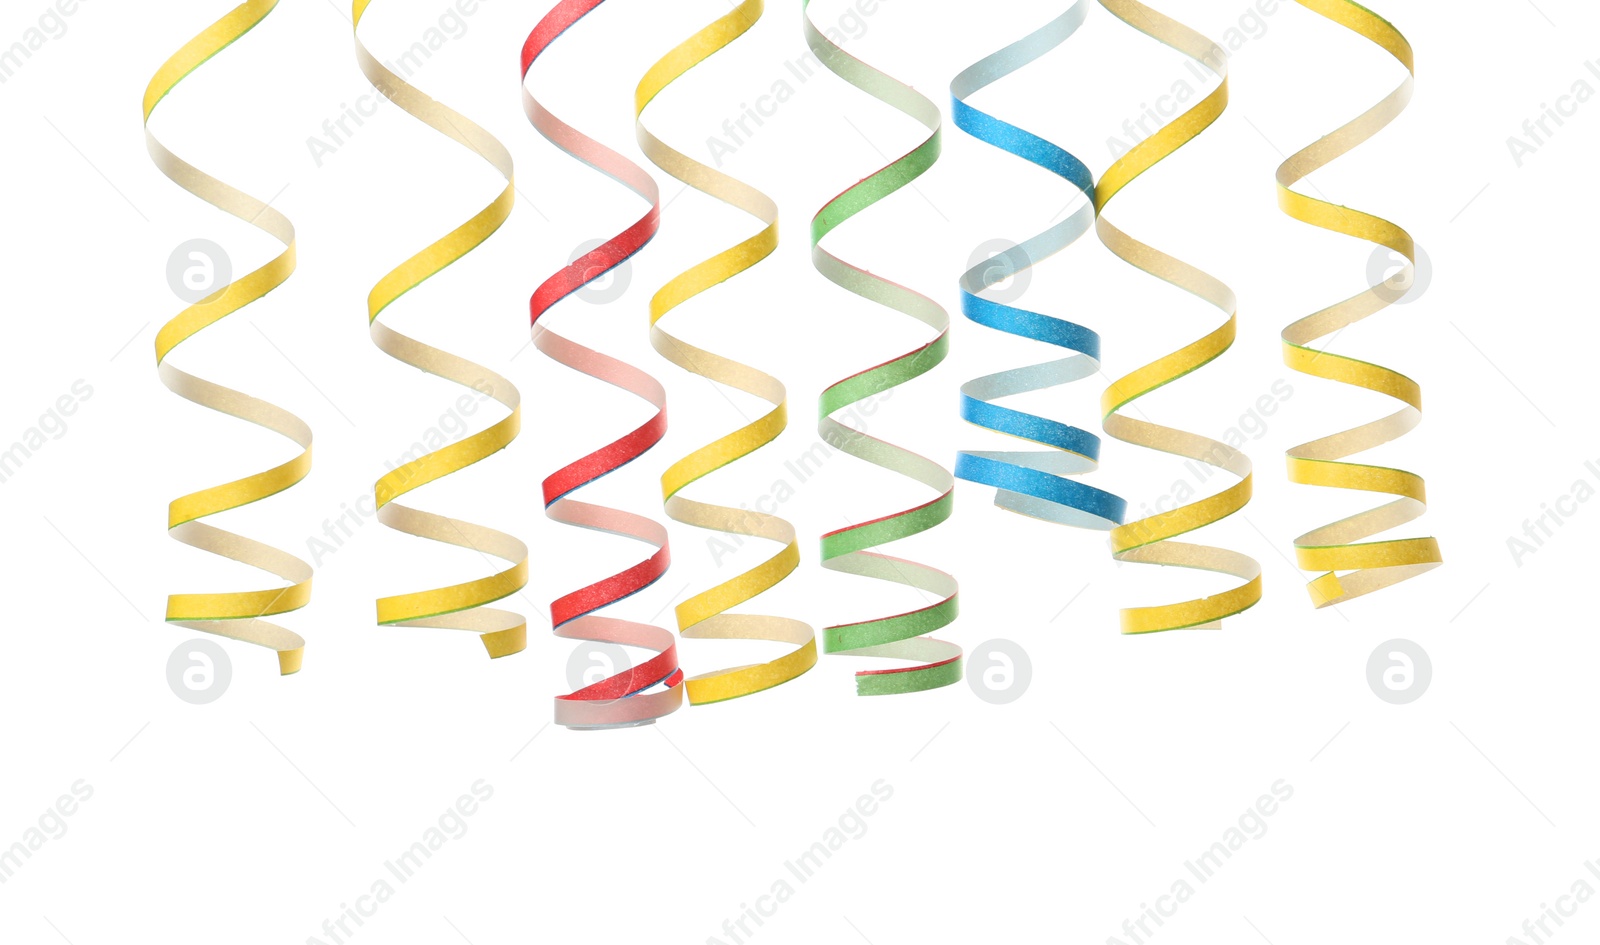 Photo of Colorful serpentine streamers on white background. Festive decor